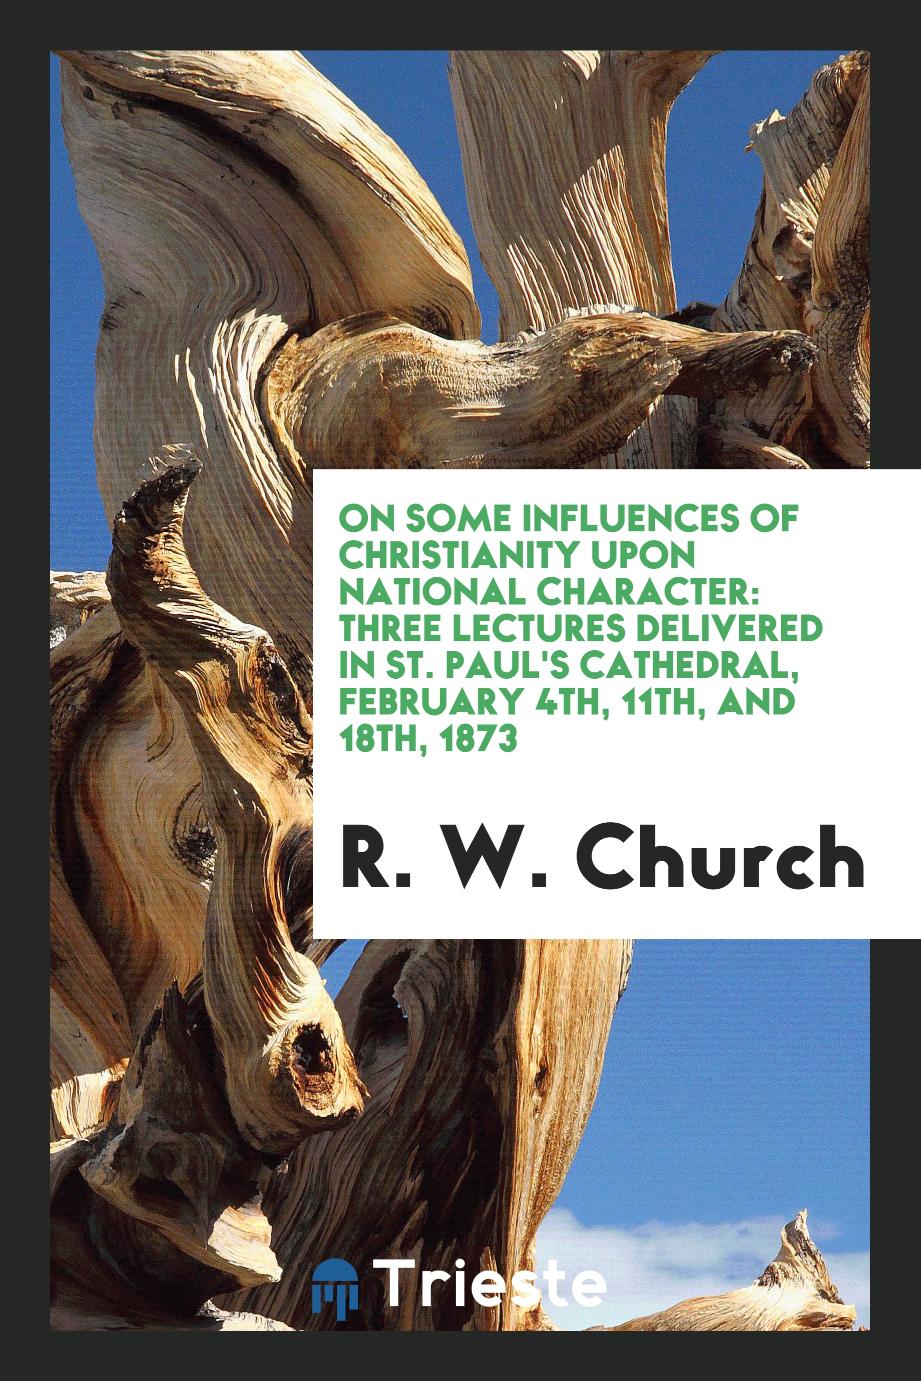 On some influences of Christianity upon national character: three lectures delivered in St. Paul's Cathedral, February 4th, 11th, and 18th, 1873